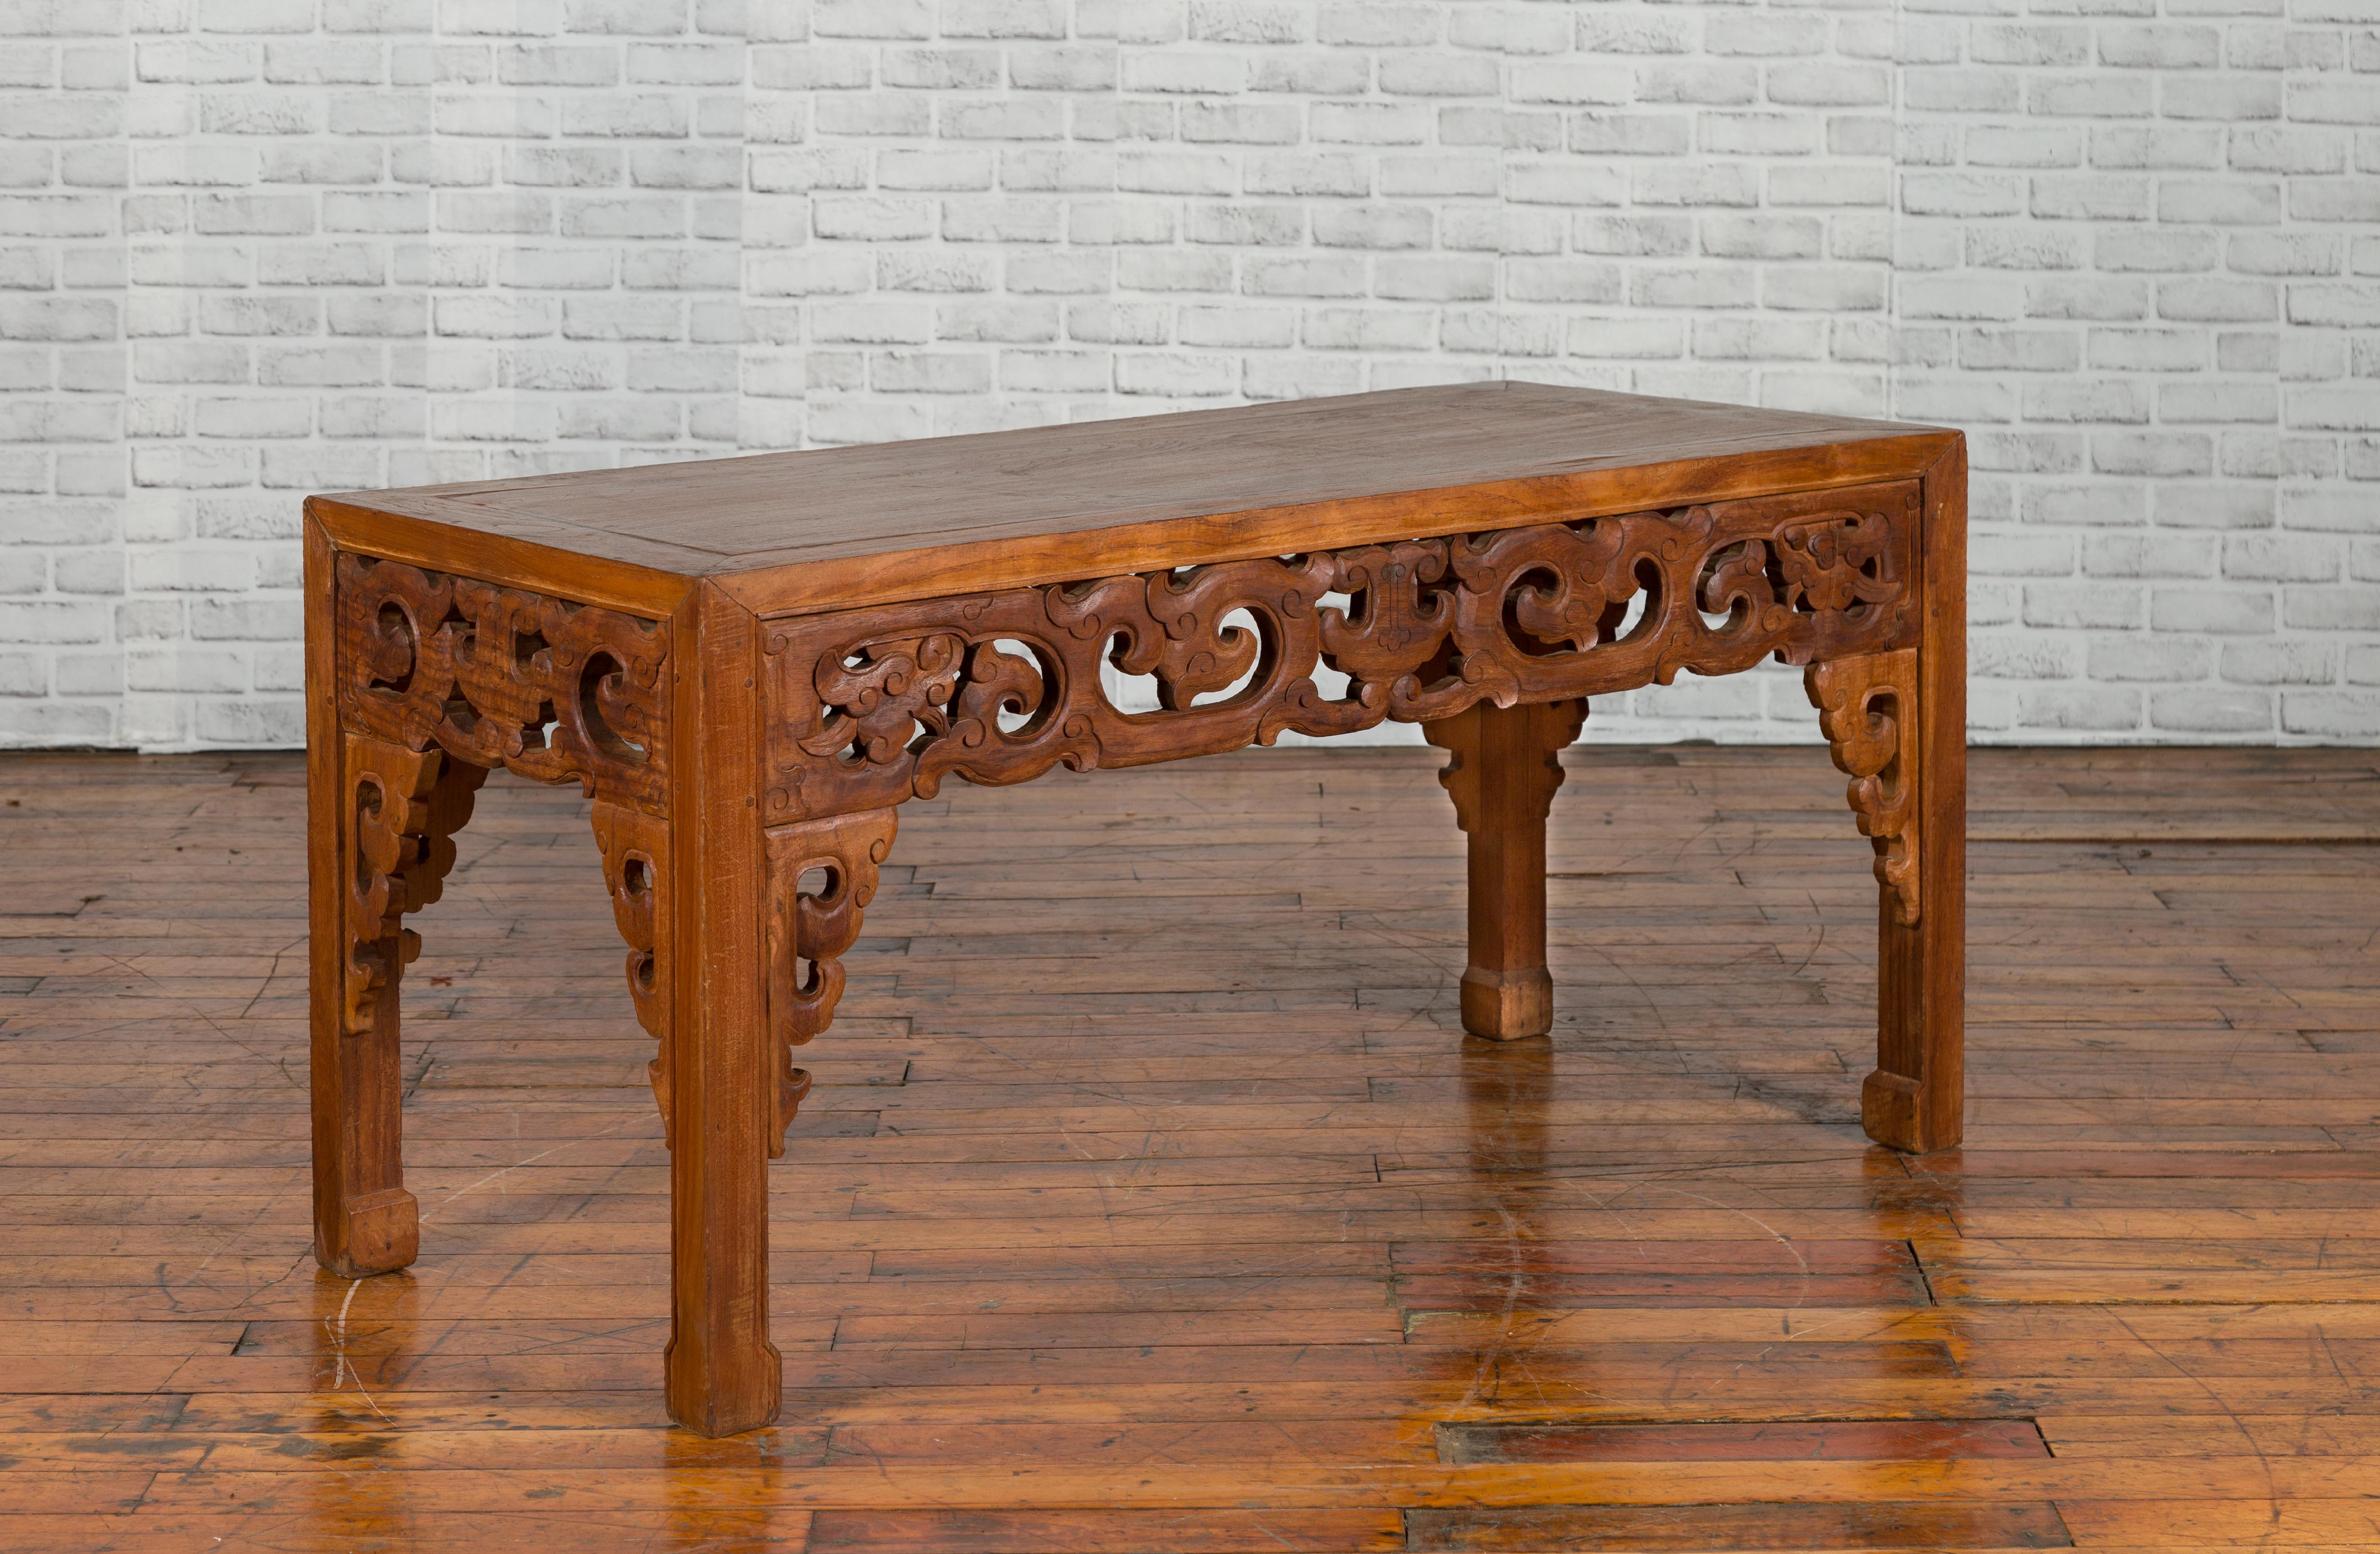 A Chinese antique low side table from the early 20th century, with cloudy carved apron. Created in China during the early years of the 20th century, this wooden side table features a rectangular top sitting above a richly carved apron depicting